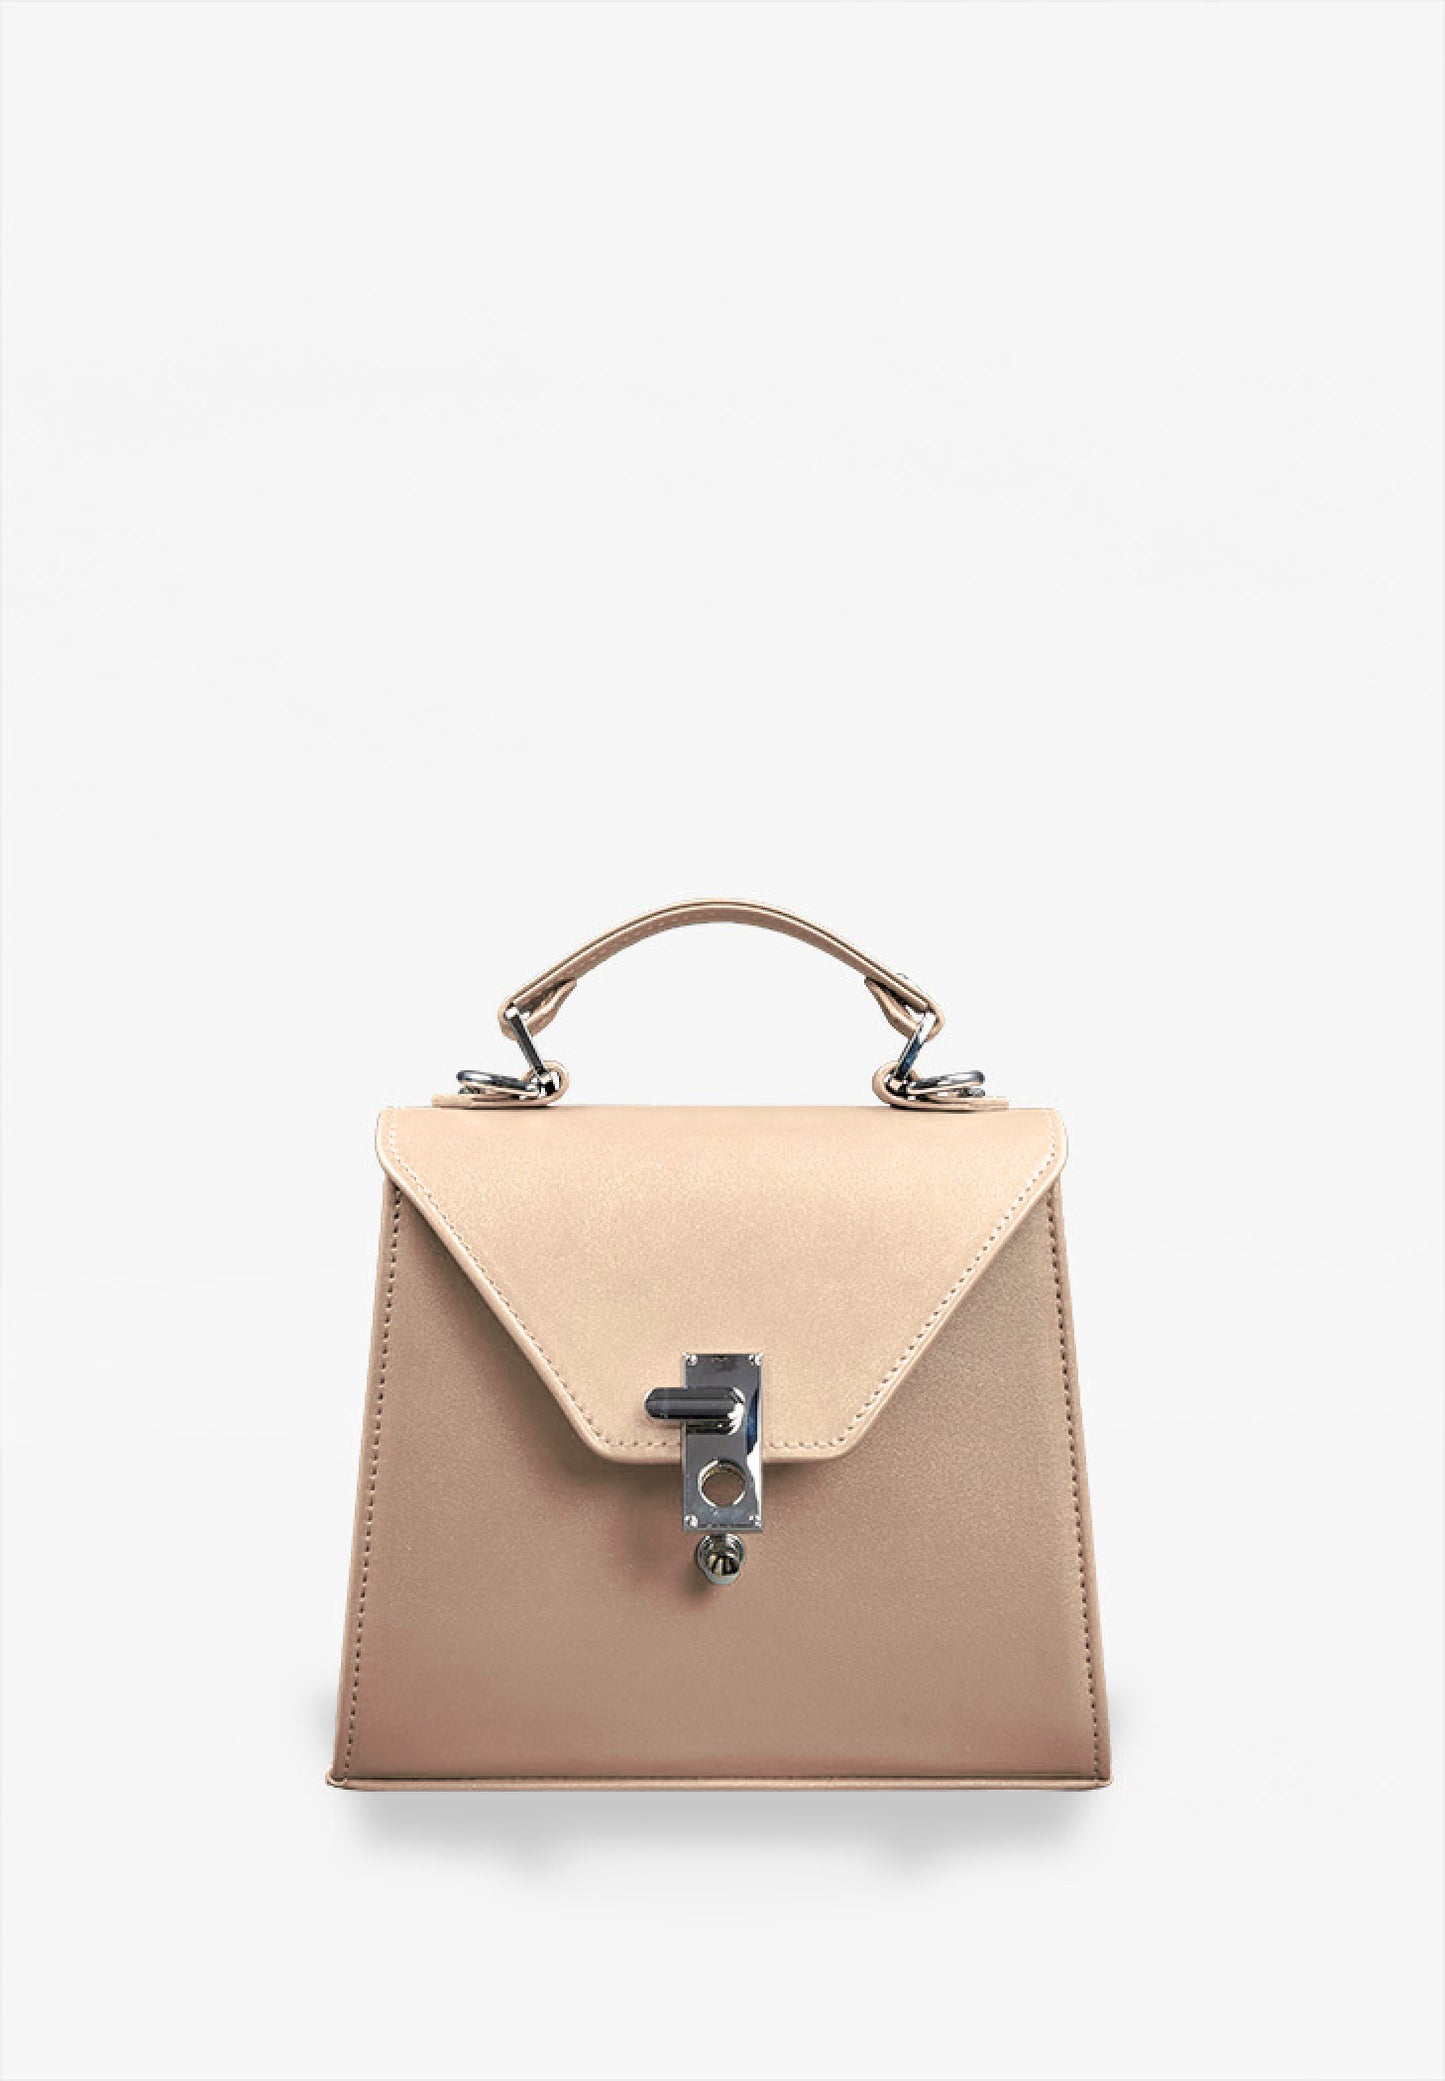 leather mid-sized bag for women in nude color